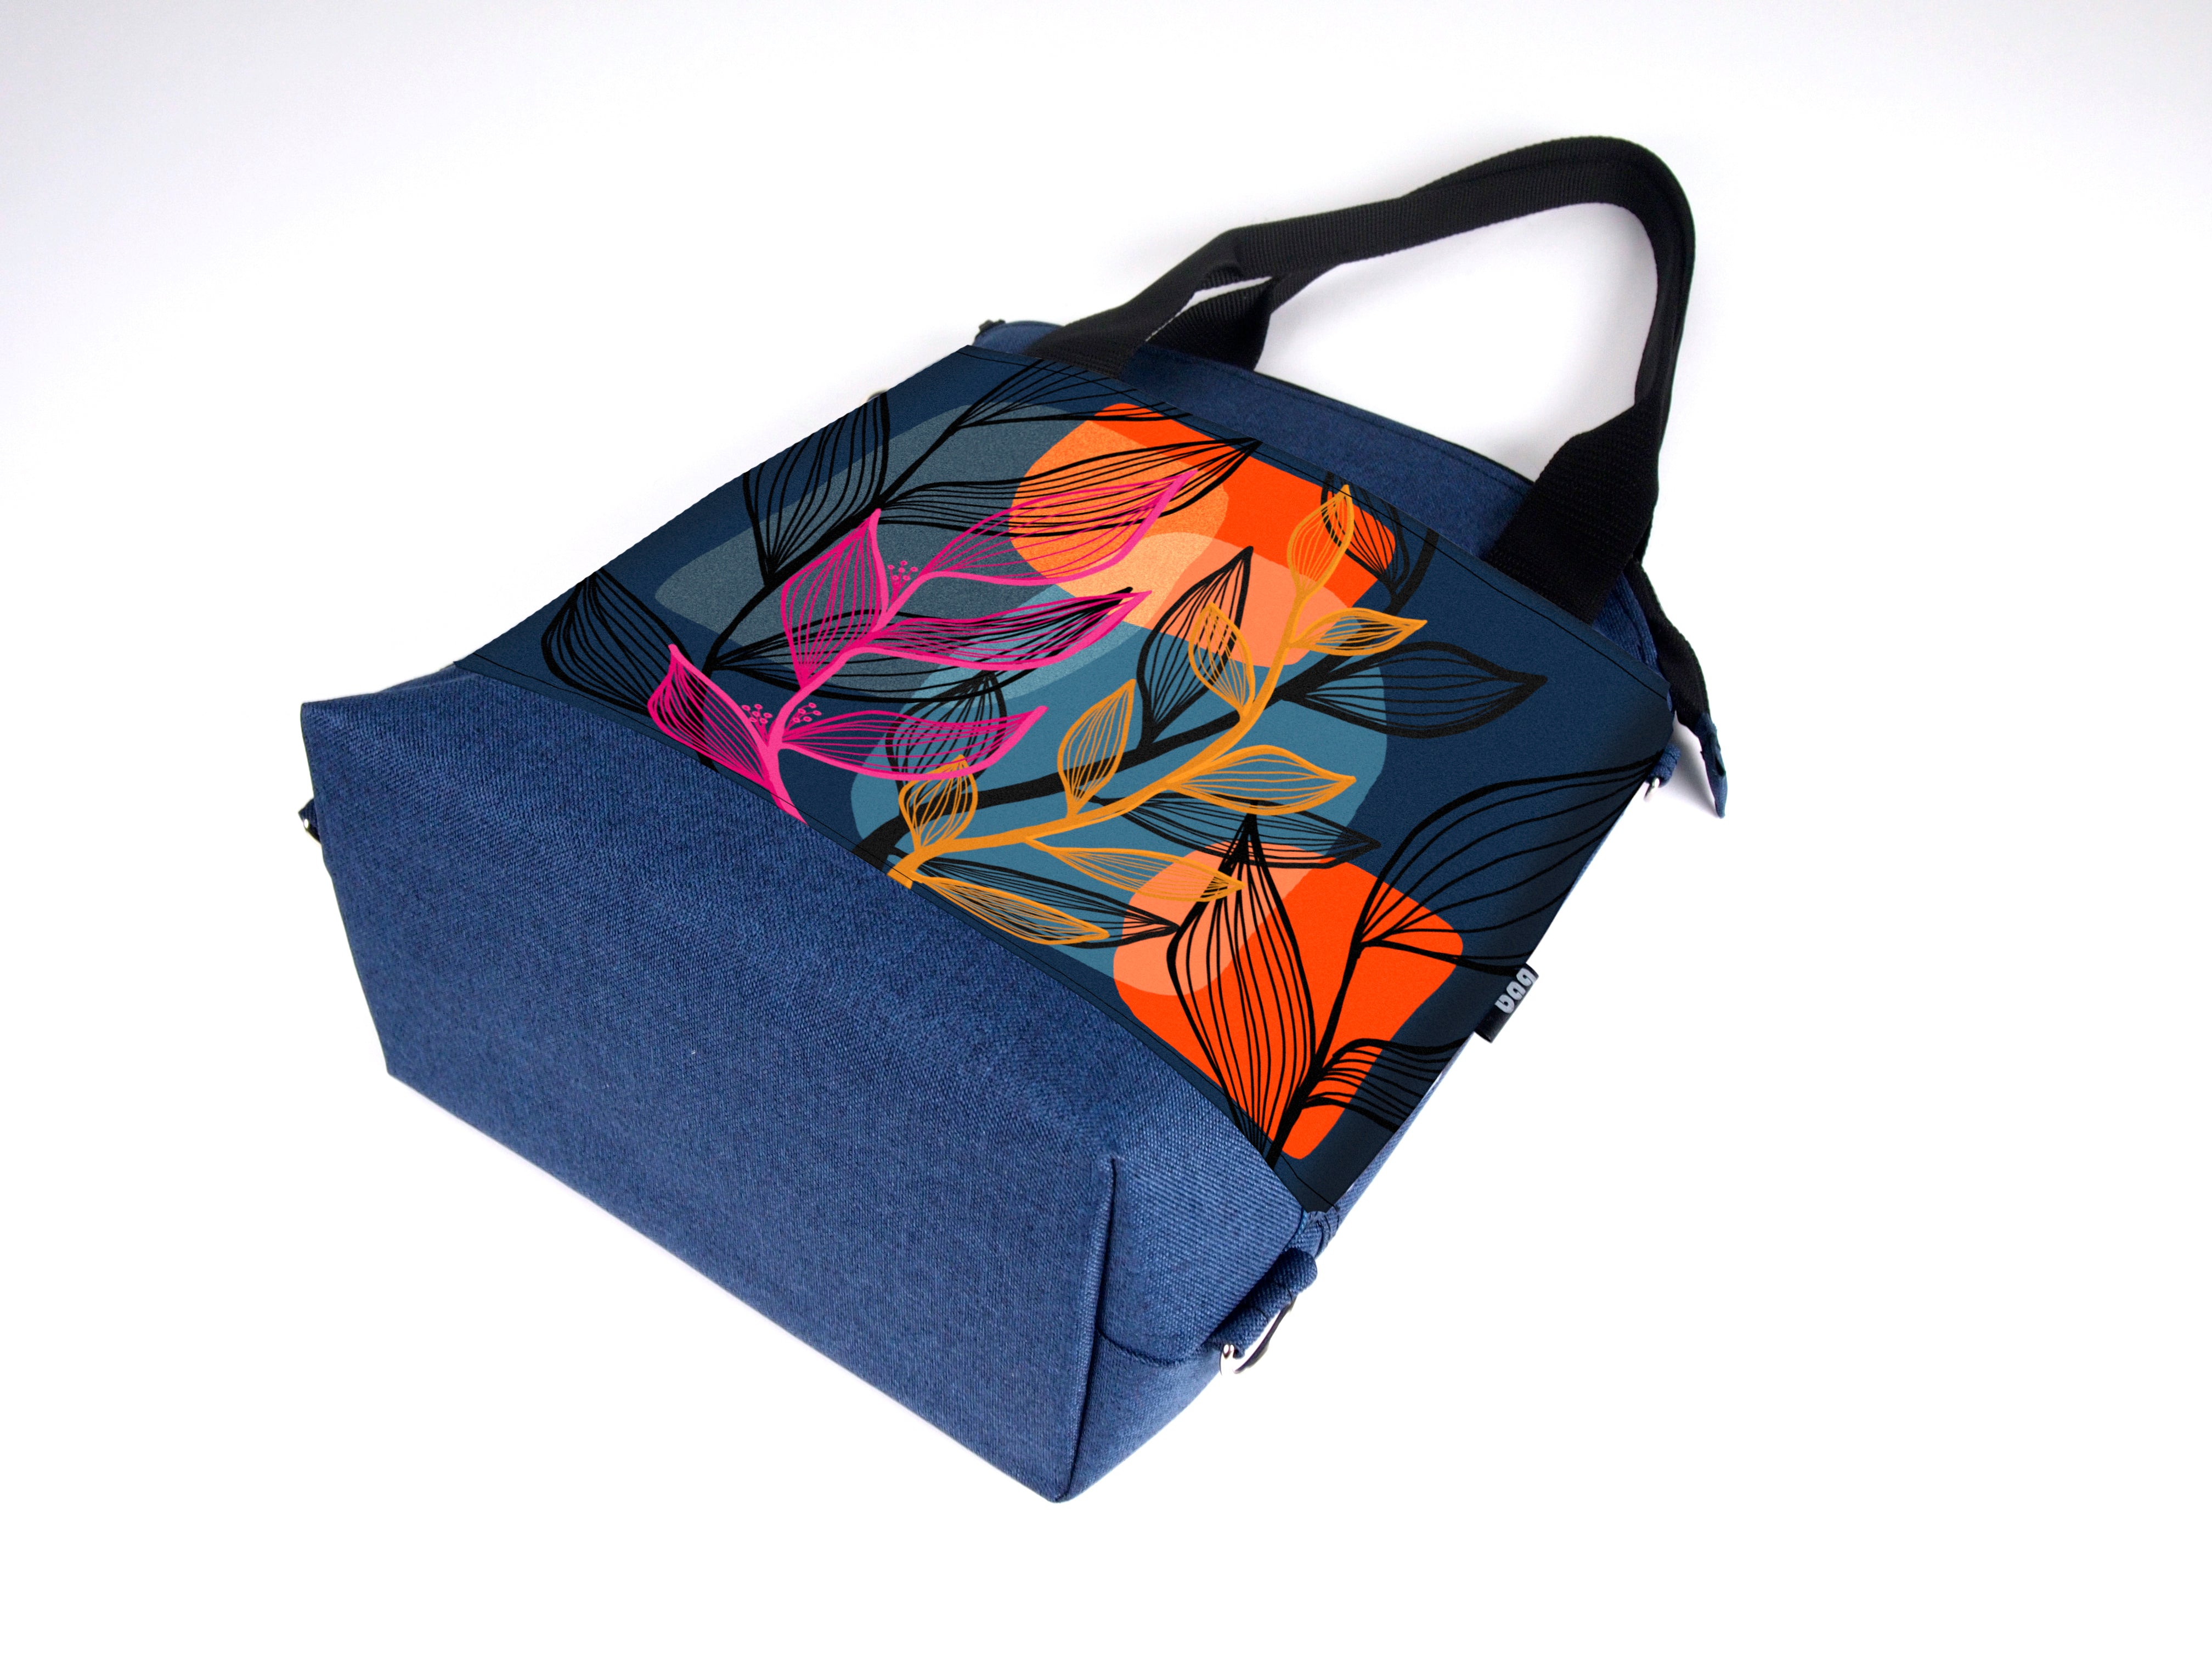 Bardo classic backpack textiles - Summer night - Premium Textiles from BARDO ART WORKS - Just lvabstract, black, floral, handemade, leaves, tablet, urban style, woman, work bag89.00! Shop now at BARDO ART WORKS